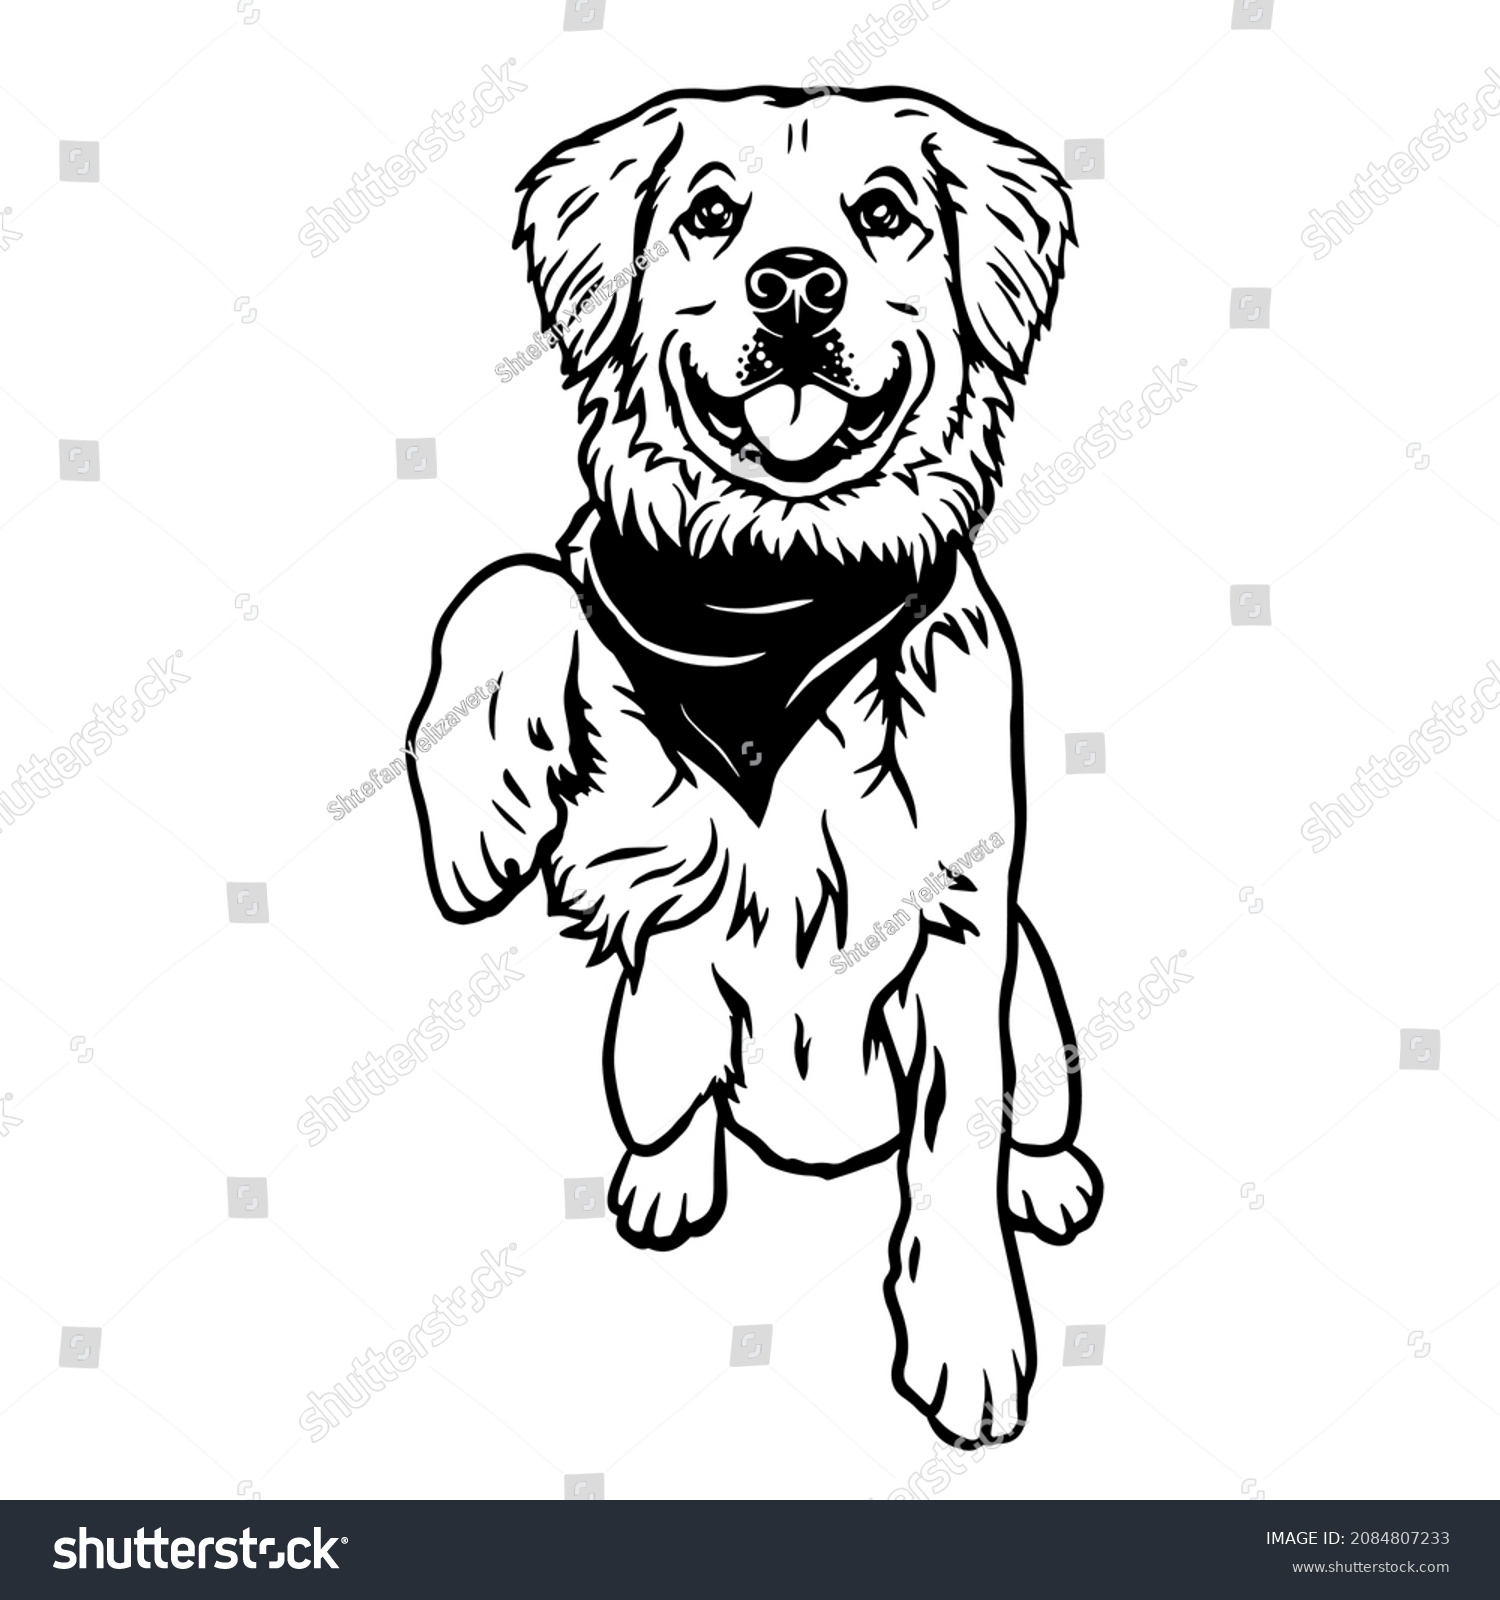 SVG of Golden Retriever Peeking Dog - head isolated on white. Dog clipart. Young retriever vector illustration file for cutting. Black dog animals svg